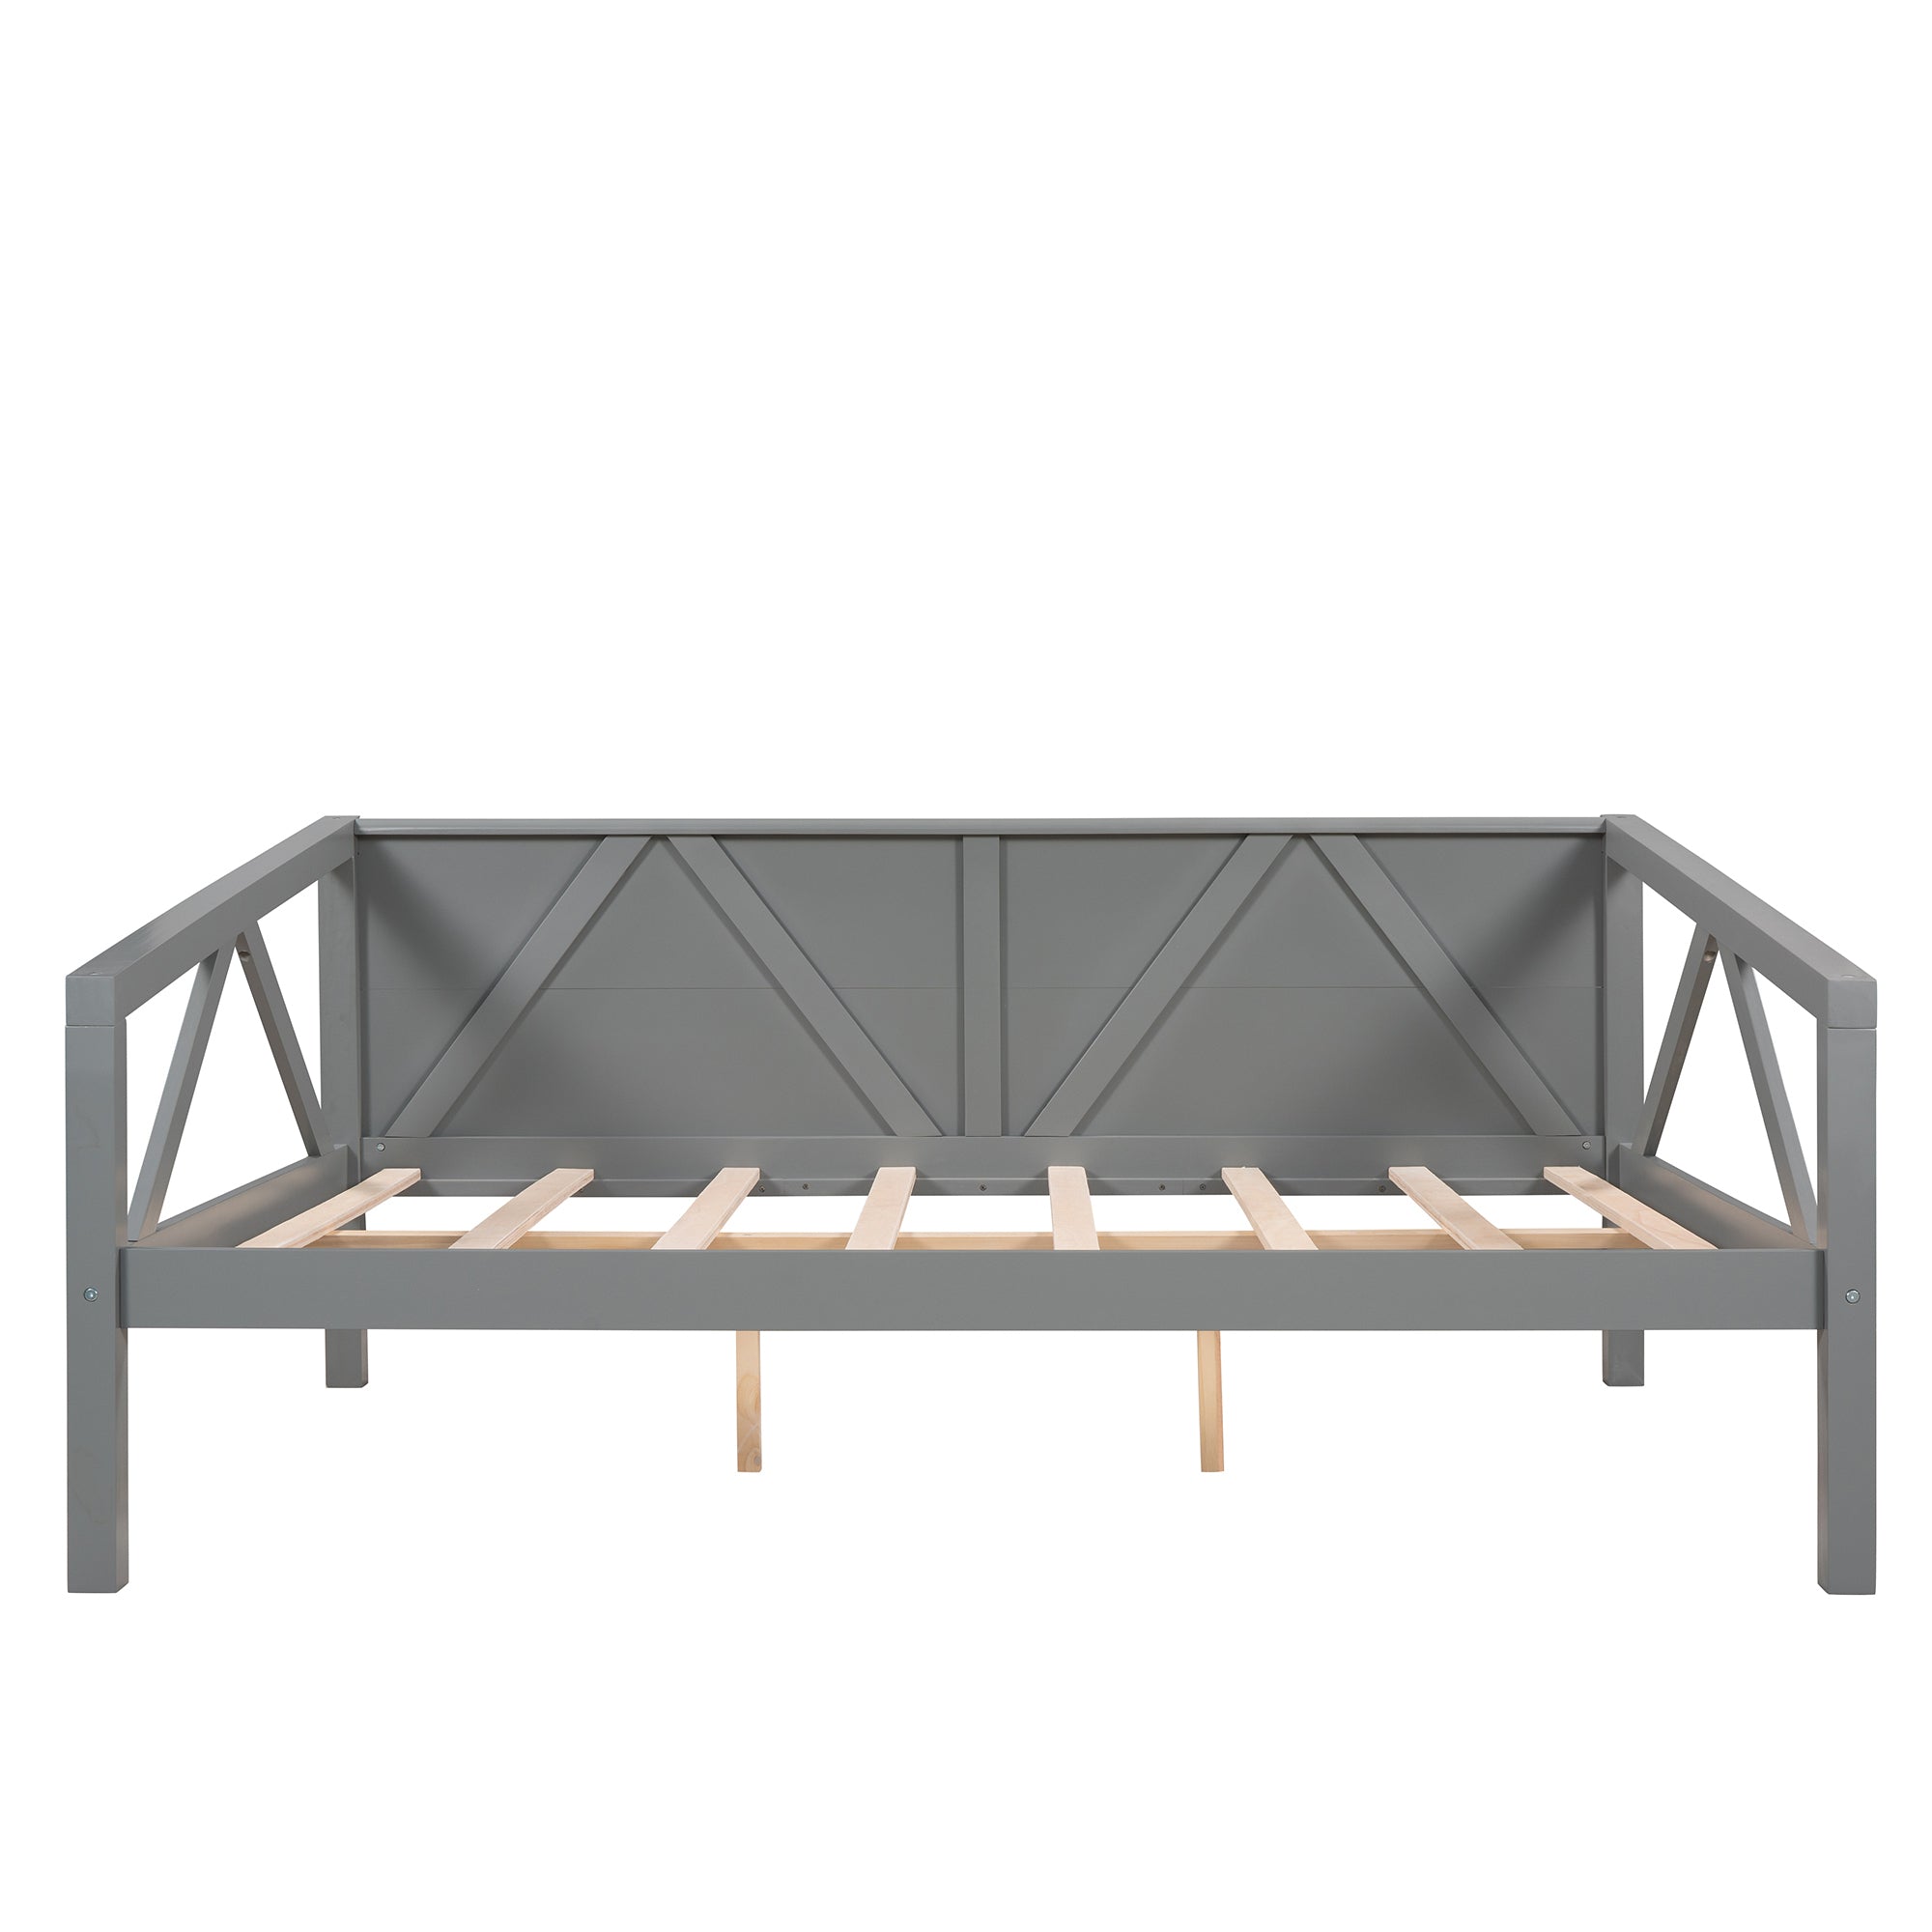 Full size Daybed, Wood Slat Support, Gray gray-solid wood